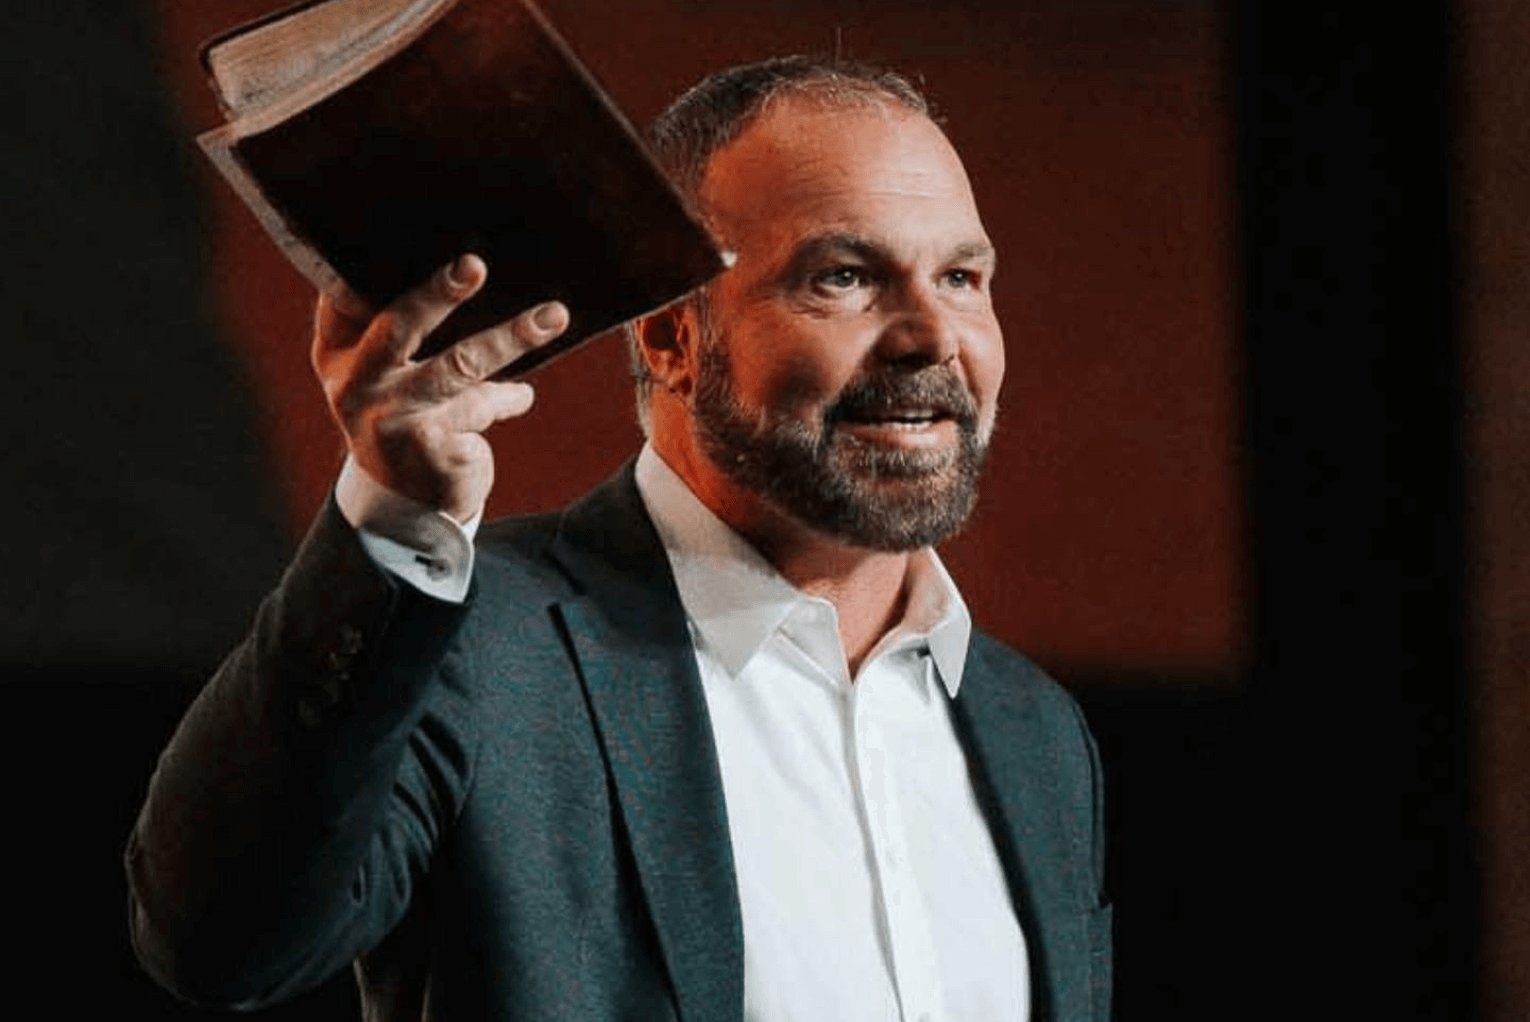 Mark Driscoll Responds with Teachings on the Jezebel Spirit